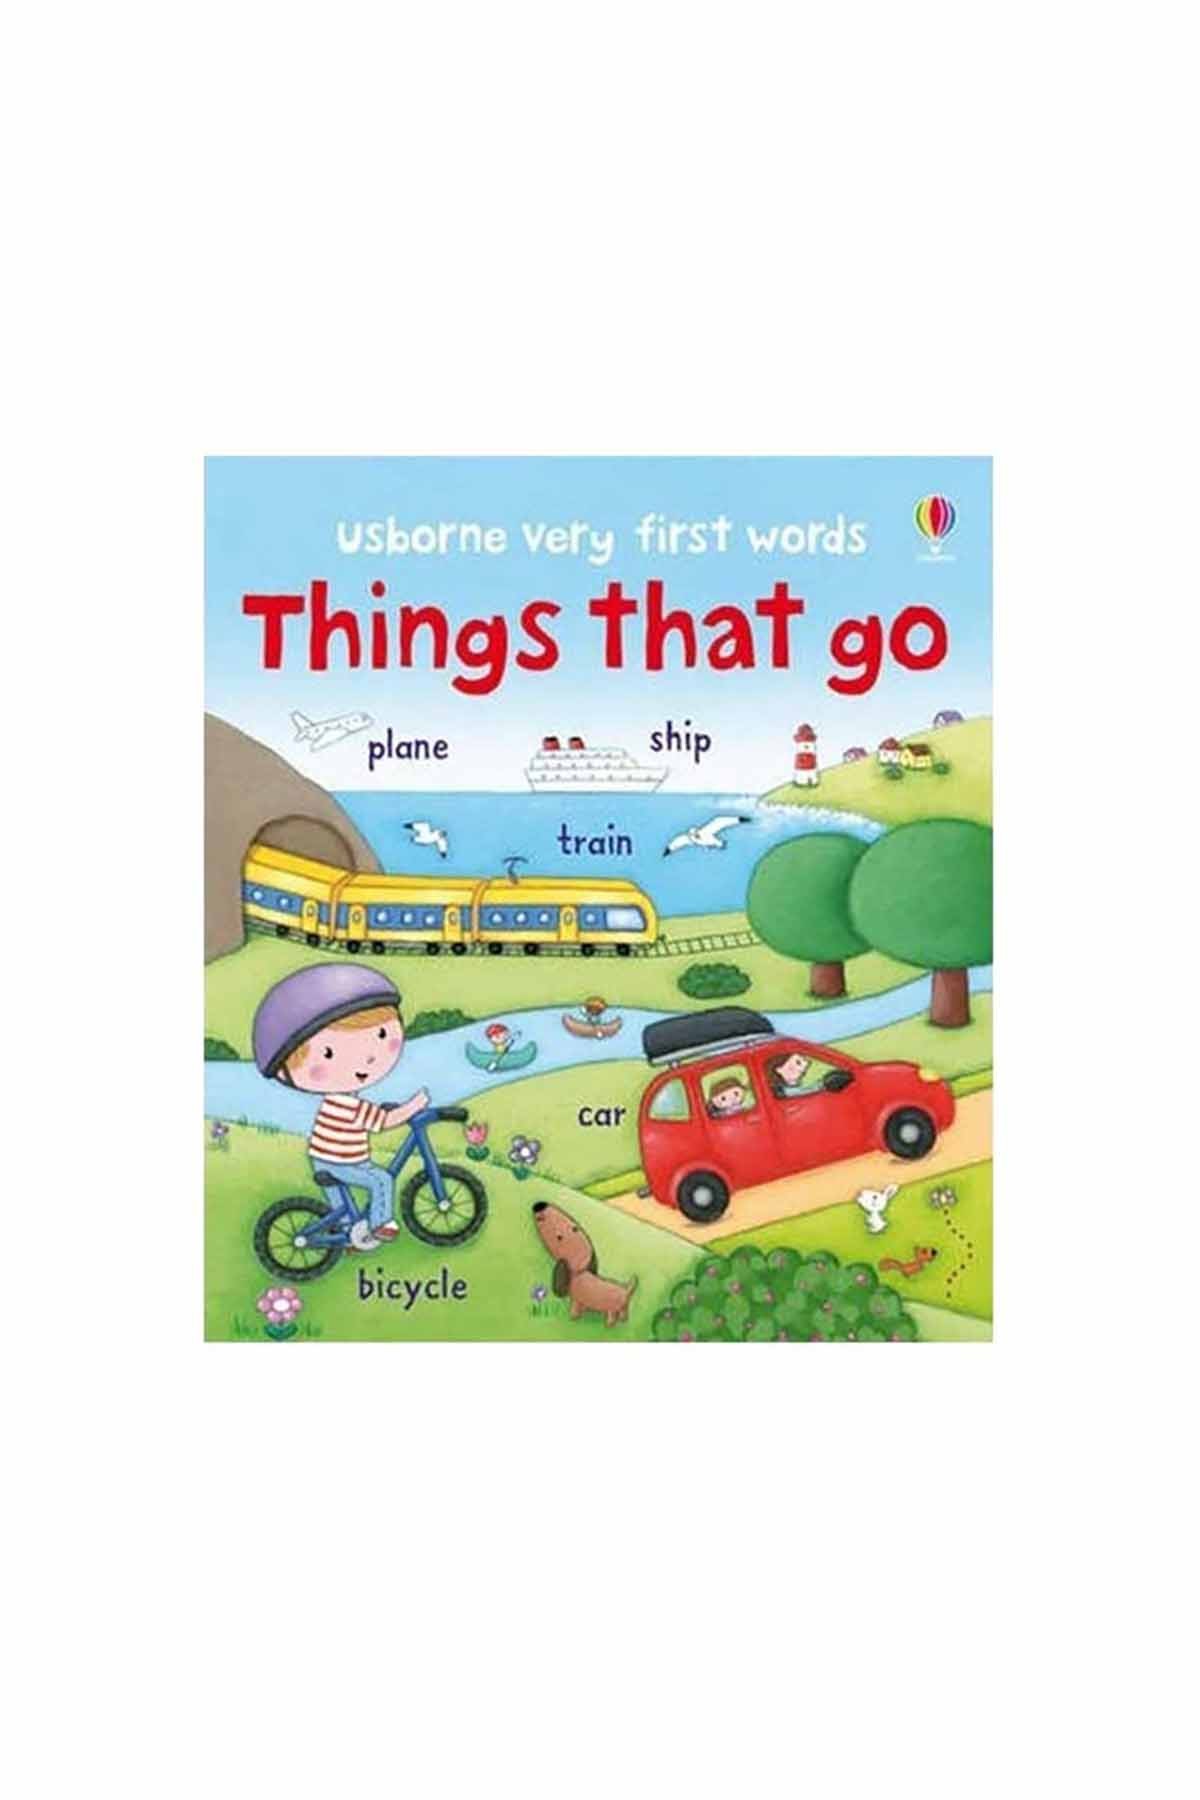 The Usborne Things That Go